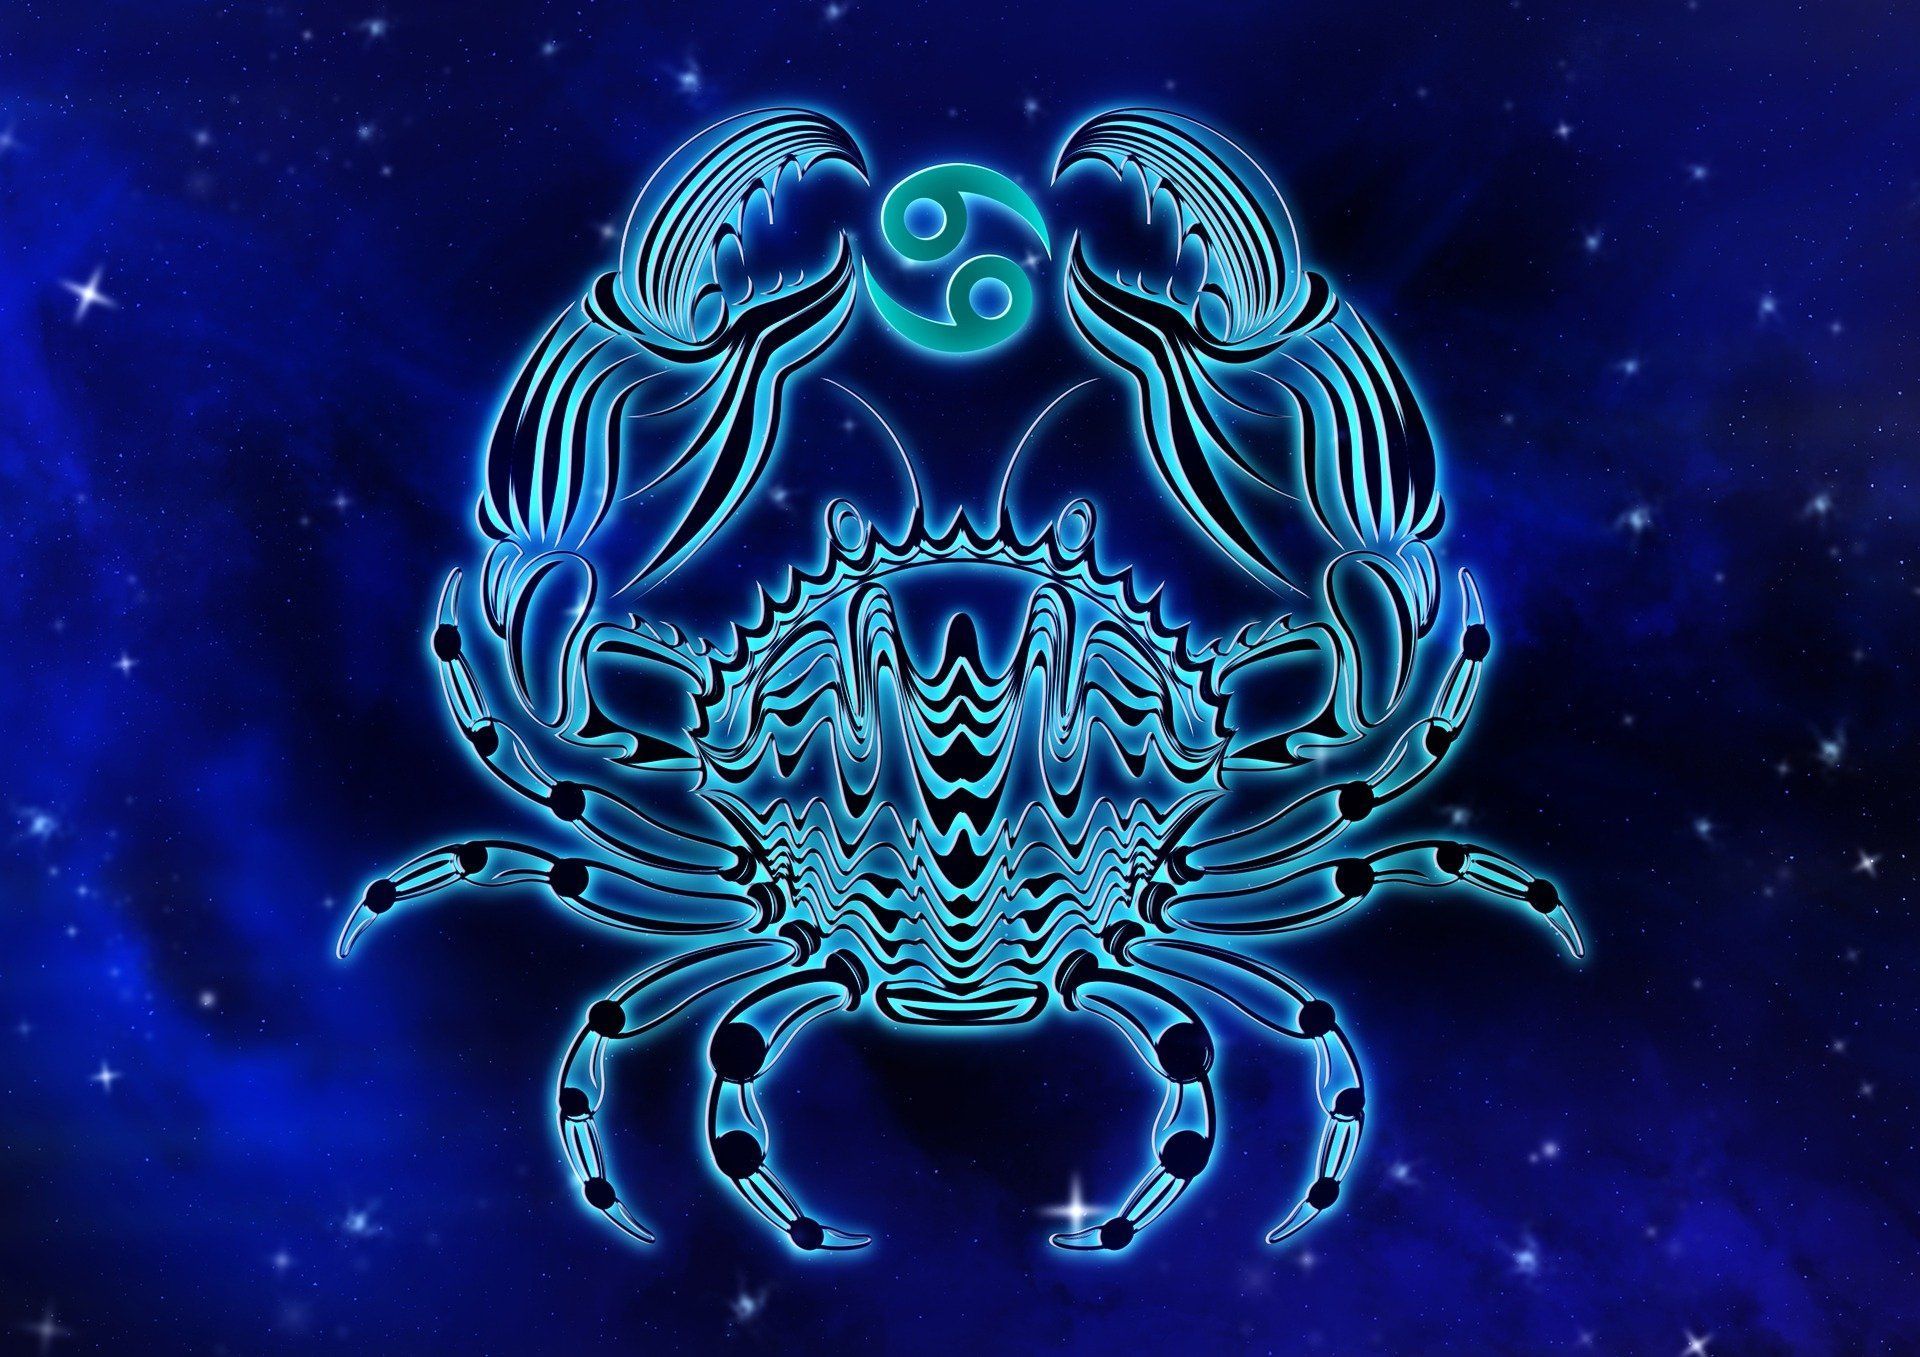 The zodiac sign for cancer - Cancer